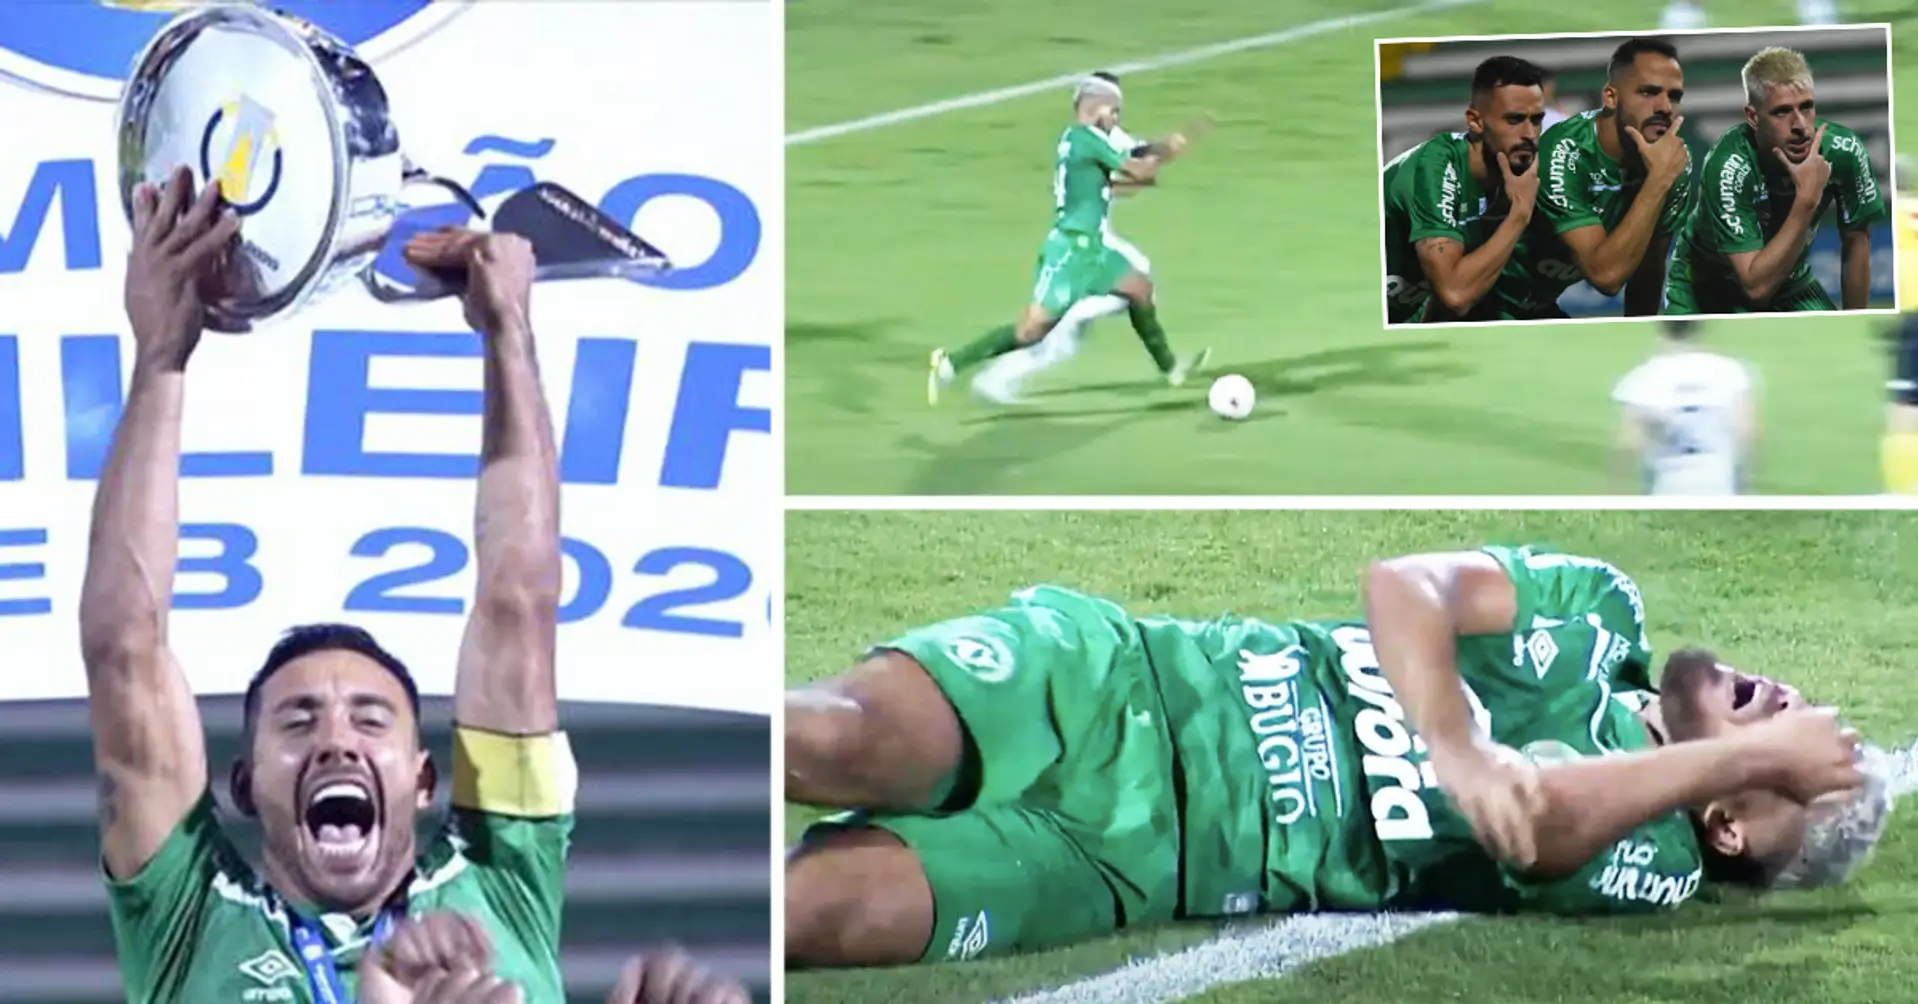 Madness in Brazil: Chapecoense player goes all in, shocks teammates with a risky penalty to win promotion at 98 min